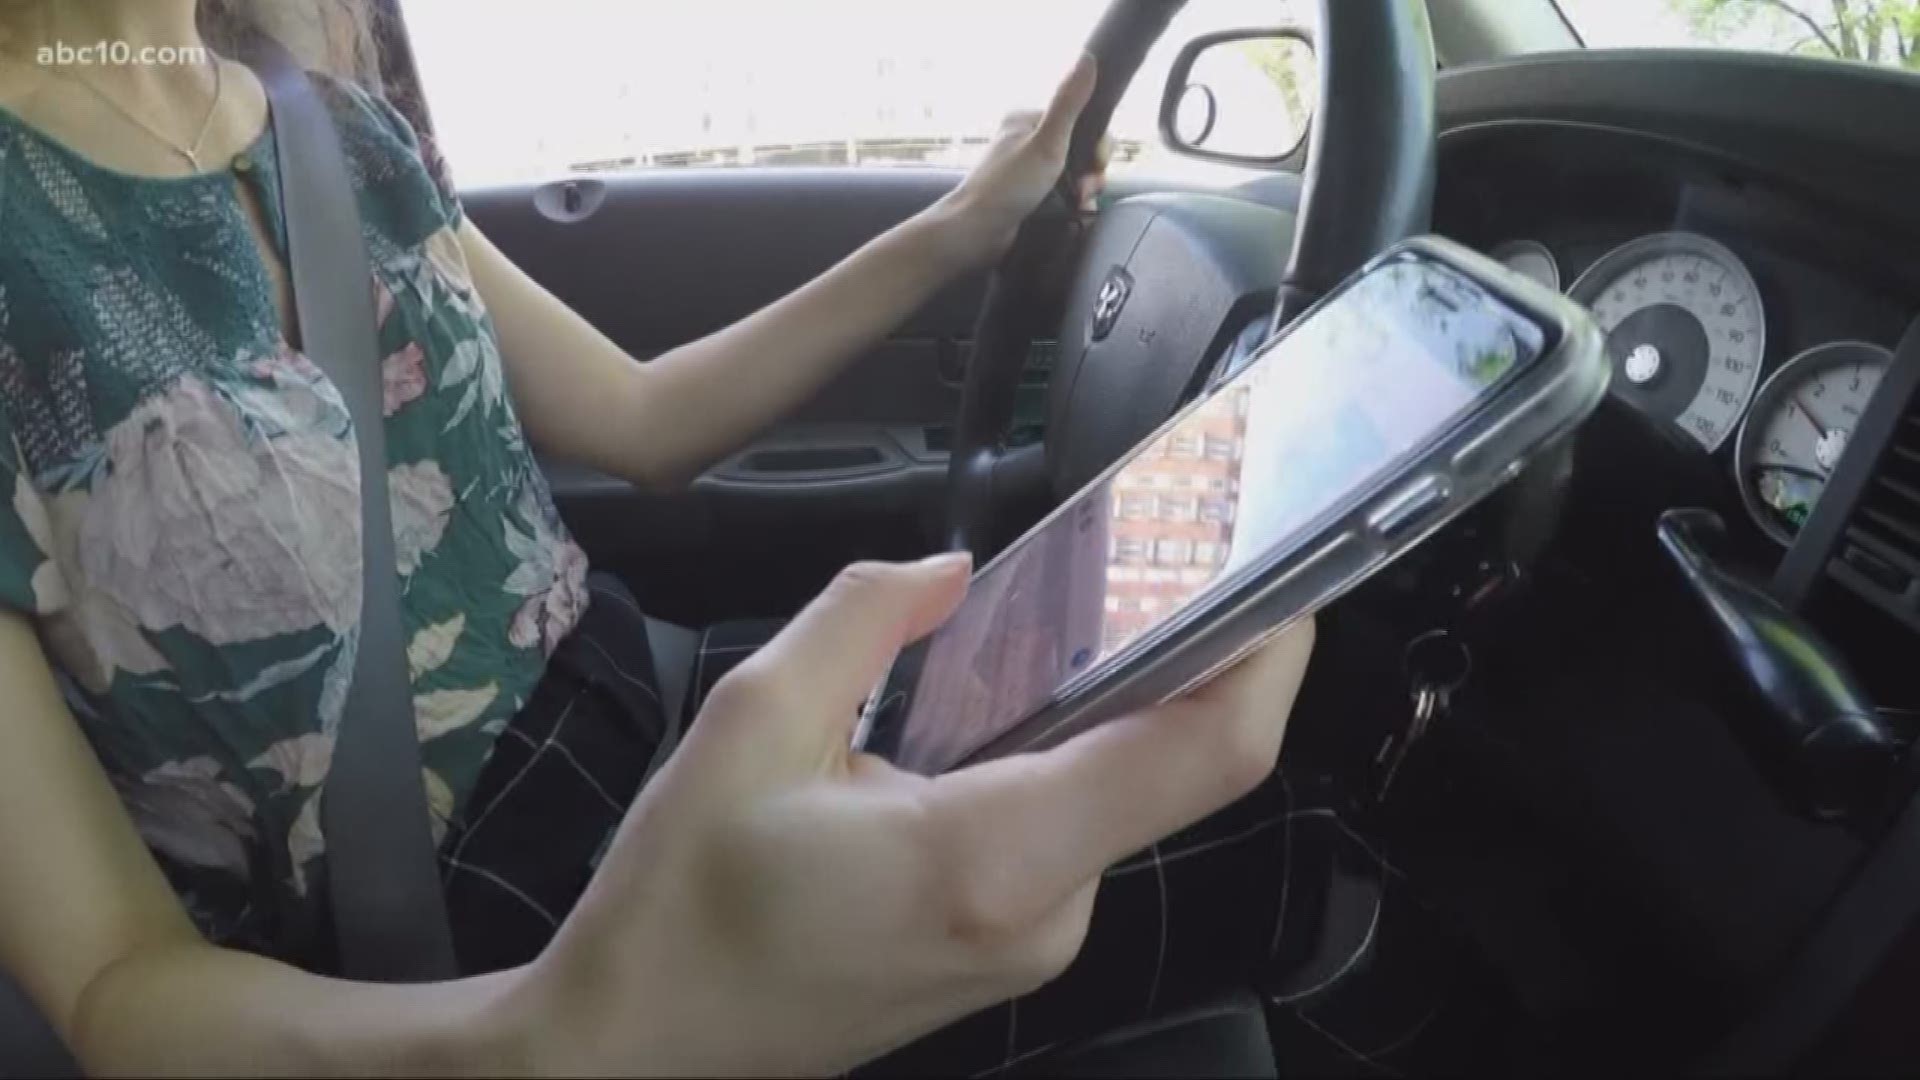 April is the National Safety Council’s "Distracted Driving Awareness Month." Sacramento-based personal injury attorney Kellen Sinclair busts three myths about distracted driving, and tells us his "essential trio."